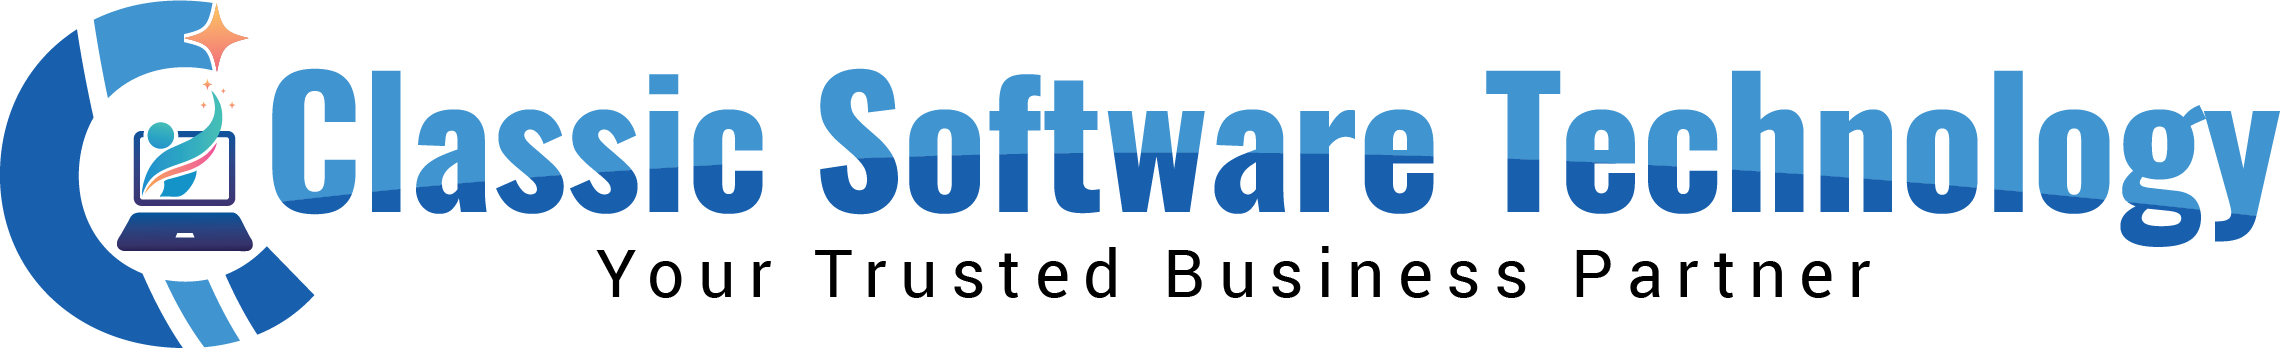 Classic Software Technology-01748222093